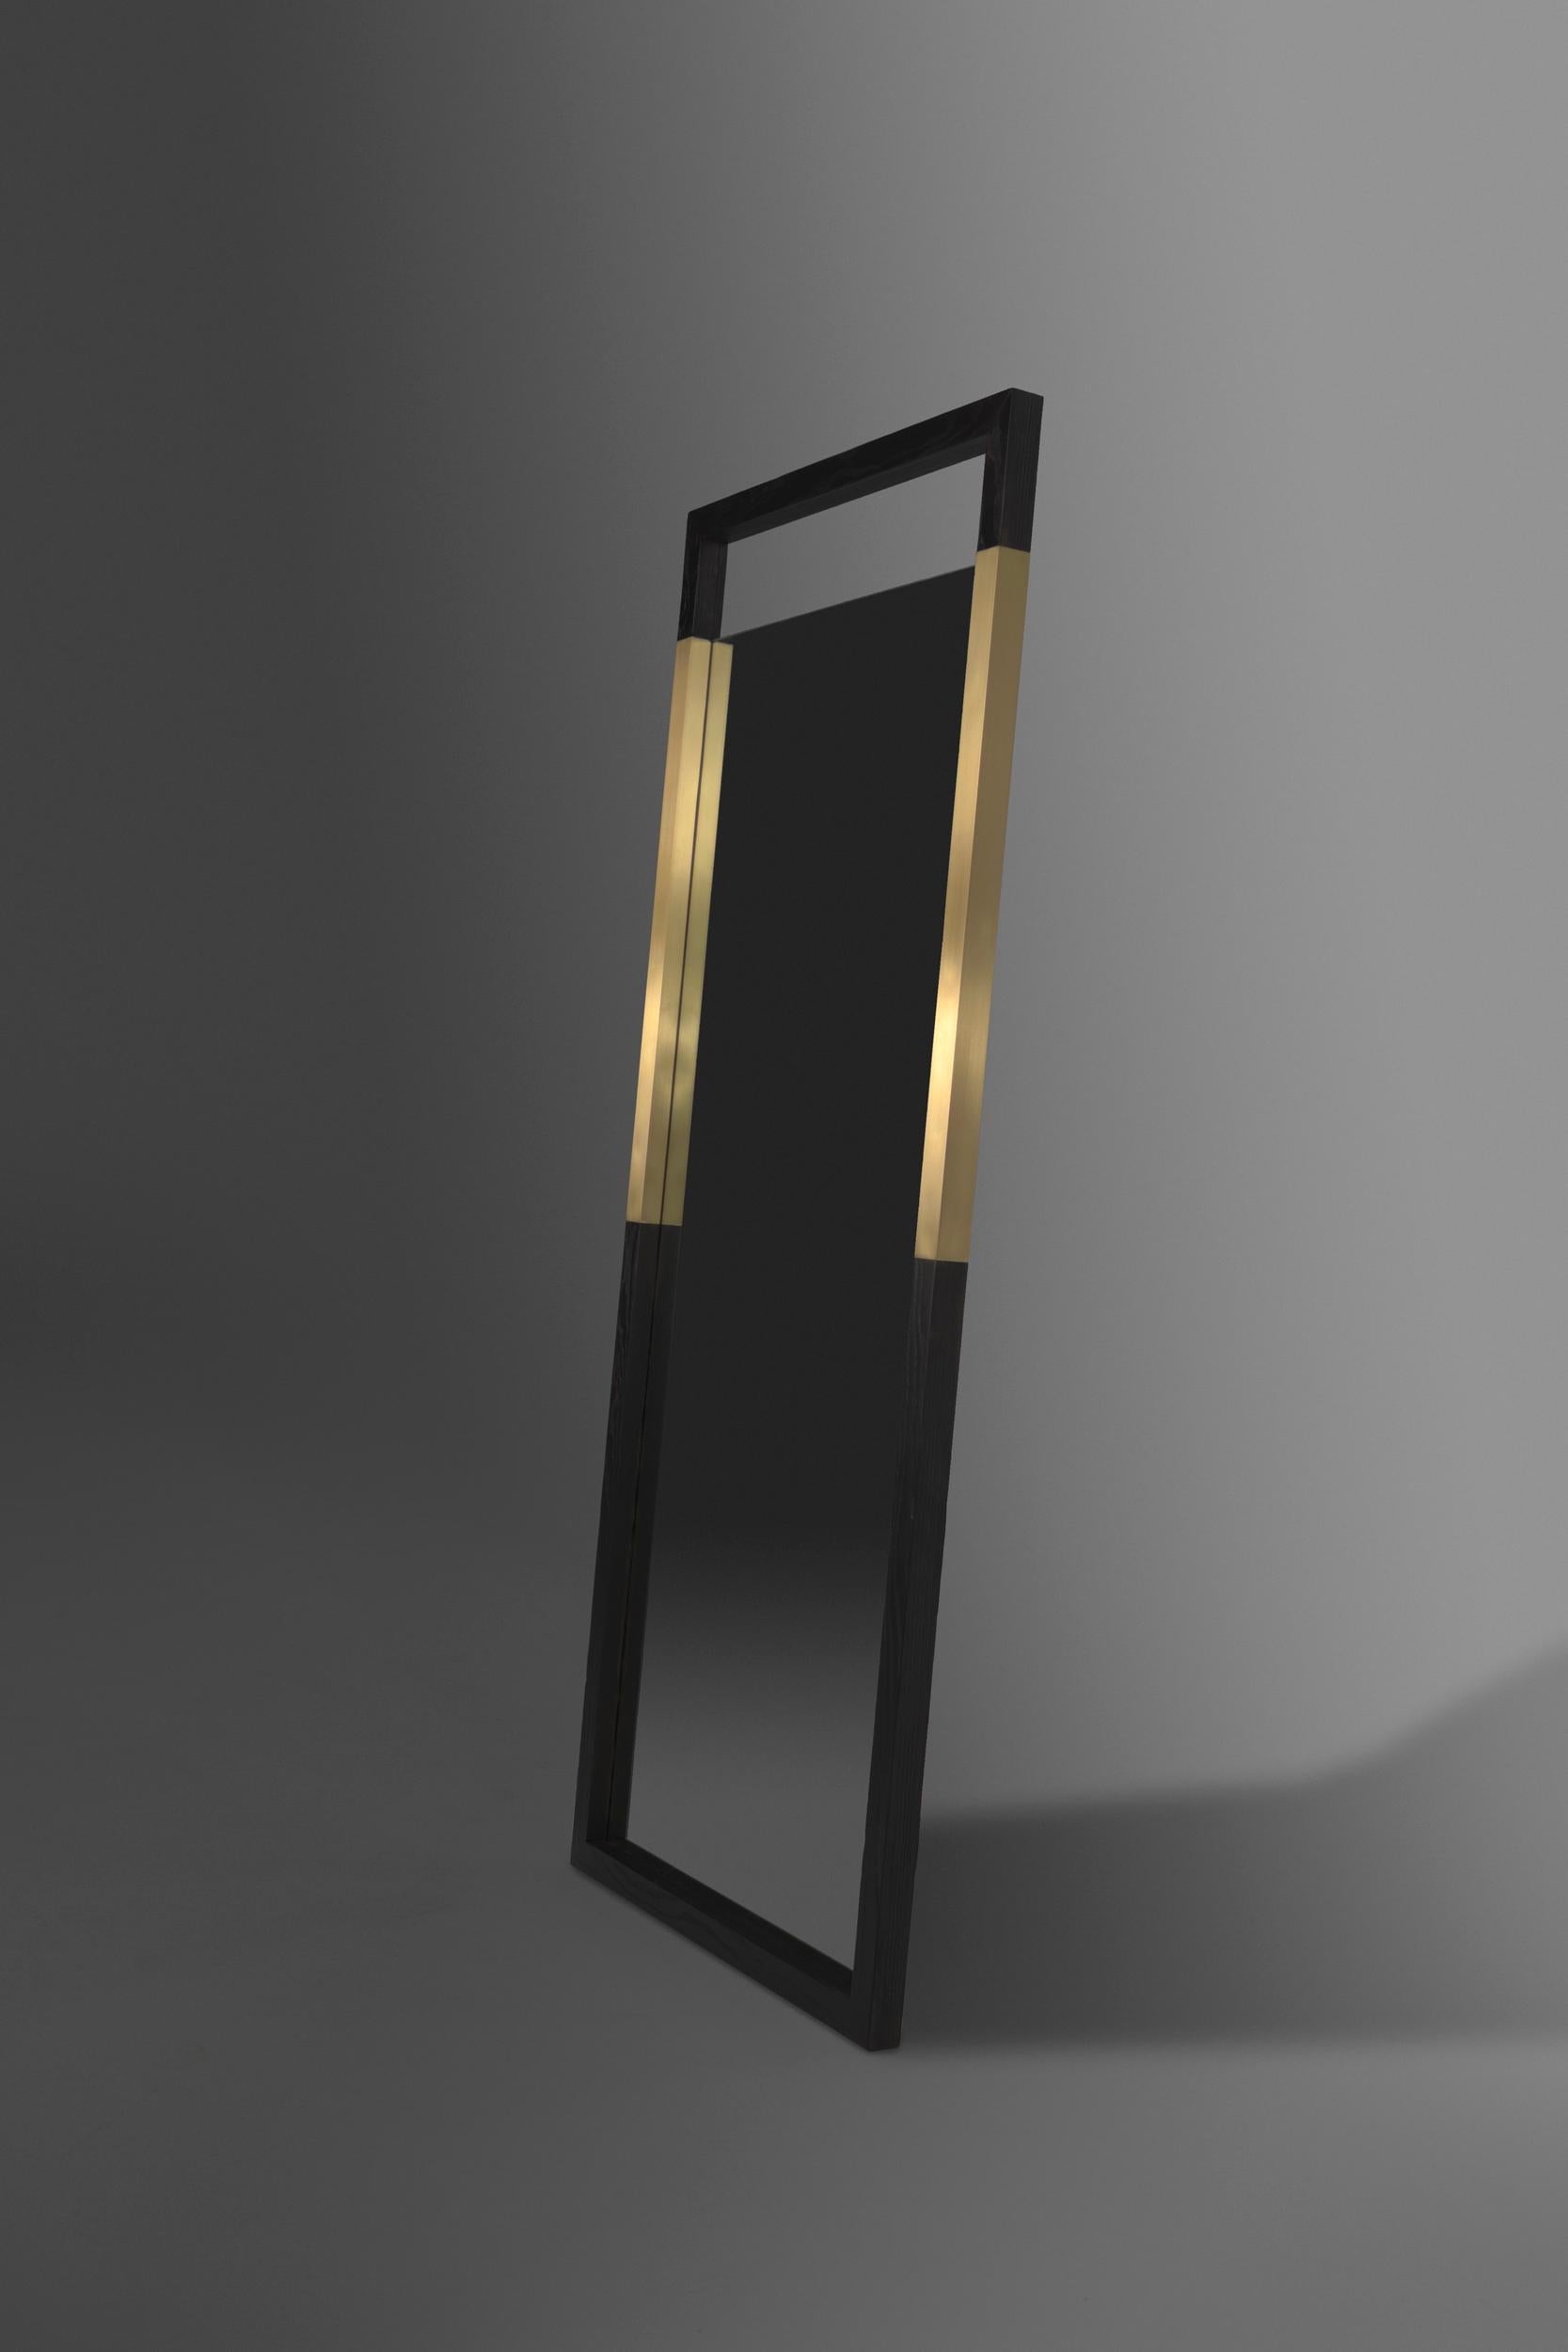 The Broadway standing mirror is a modern mirror made of charred ash wood and brass metal inserts. The open space at the top and bottom add to the modern look of the mirror and allows for the brass to be emphasized even more. This item can also be